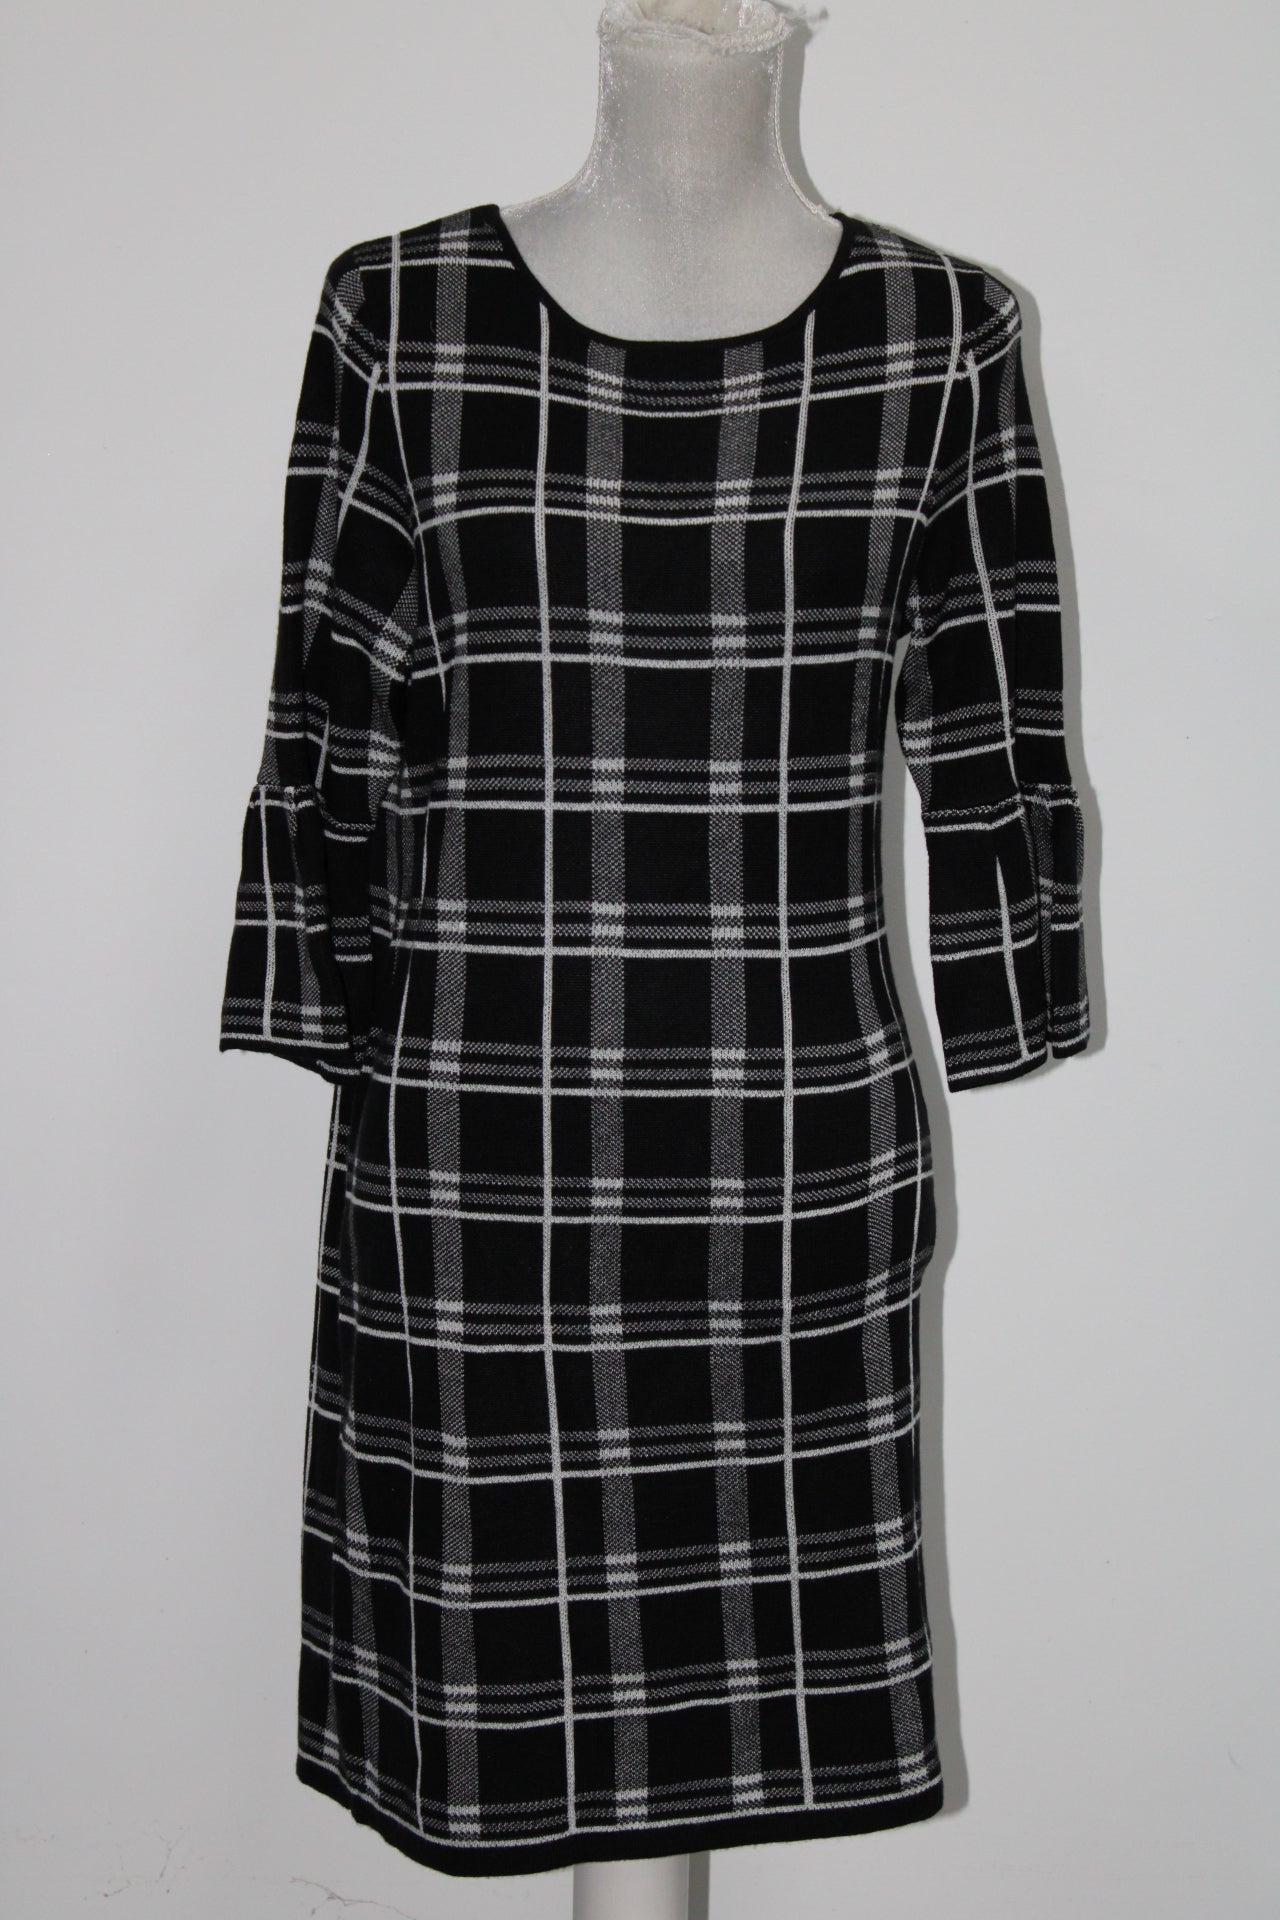 Ny Collection Plaid Sweater Dress Black PM